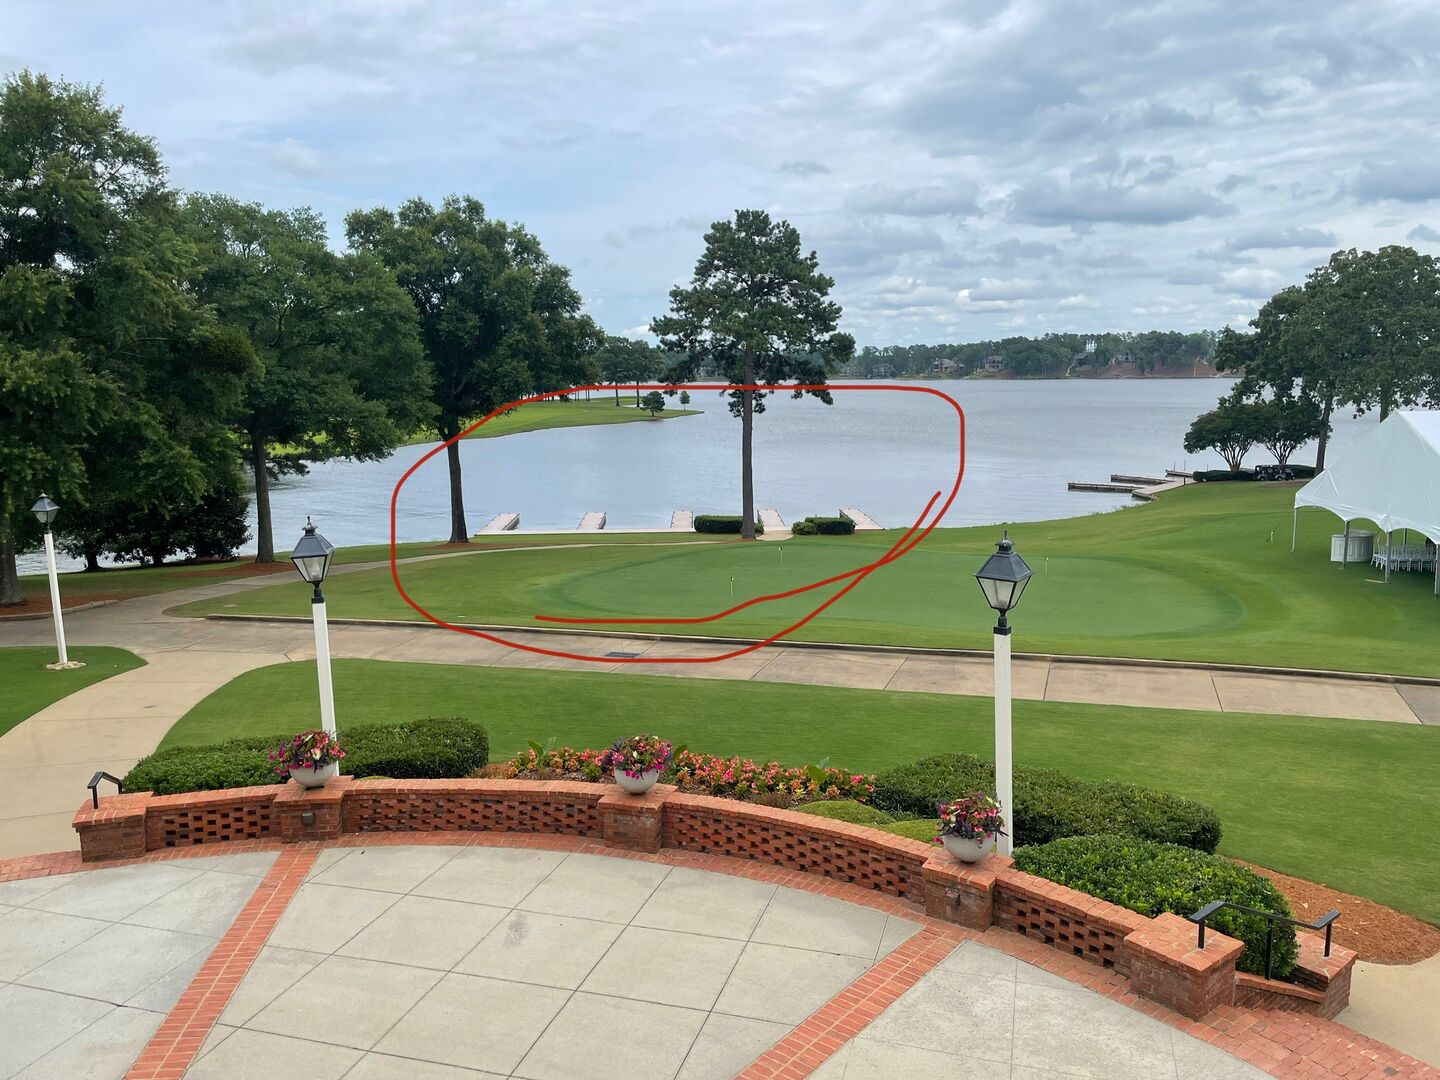 This is the view looking from the Great Waters Marina Clubhouse to the water. The docks circled are rarely used. The other set is used by golfers and diners. In the event that the dock at the house is full, boats can be parked here with a short walk back 